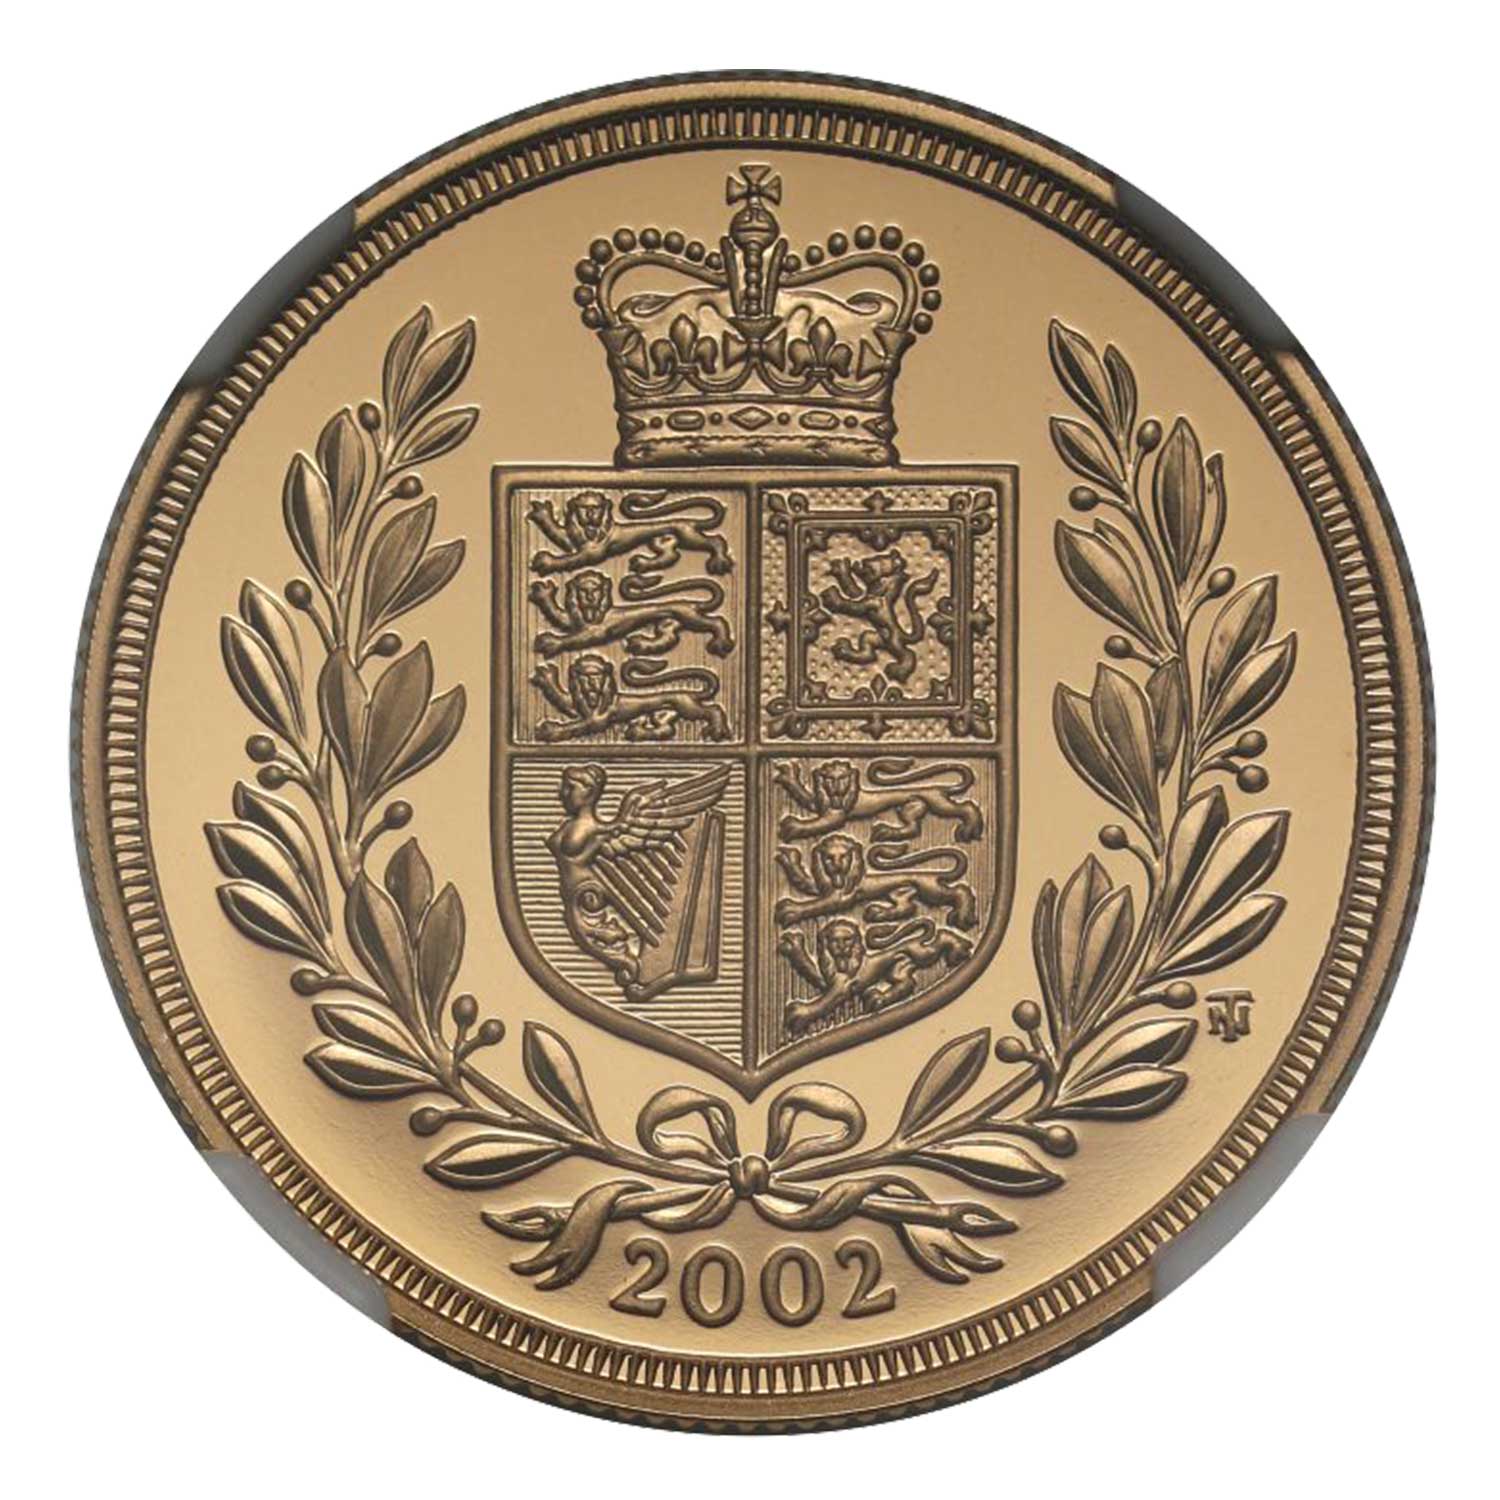 The 2002 £2 Double Sovereign